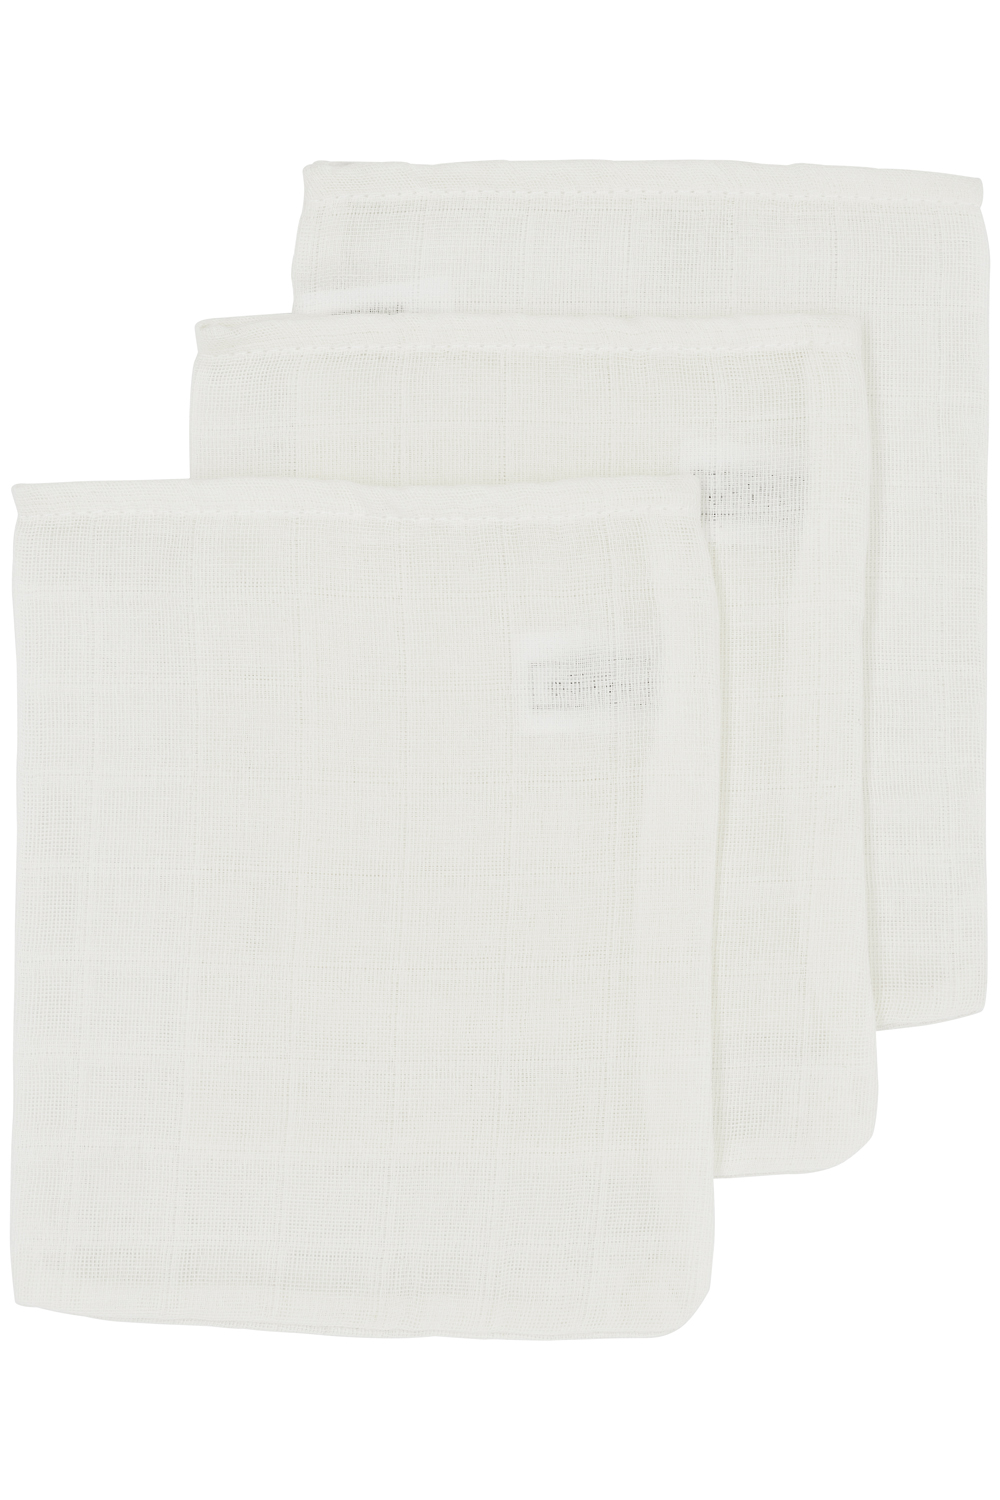 Muslin Wash Mitts 3-Pack Uni - Offwhite - 20x17cm